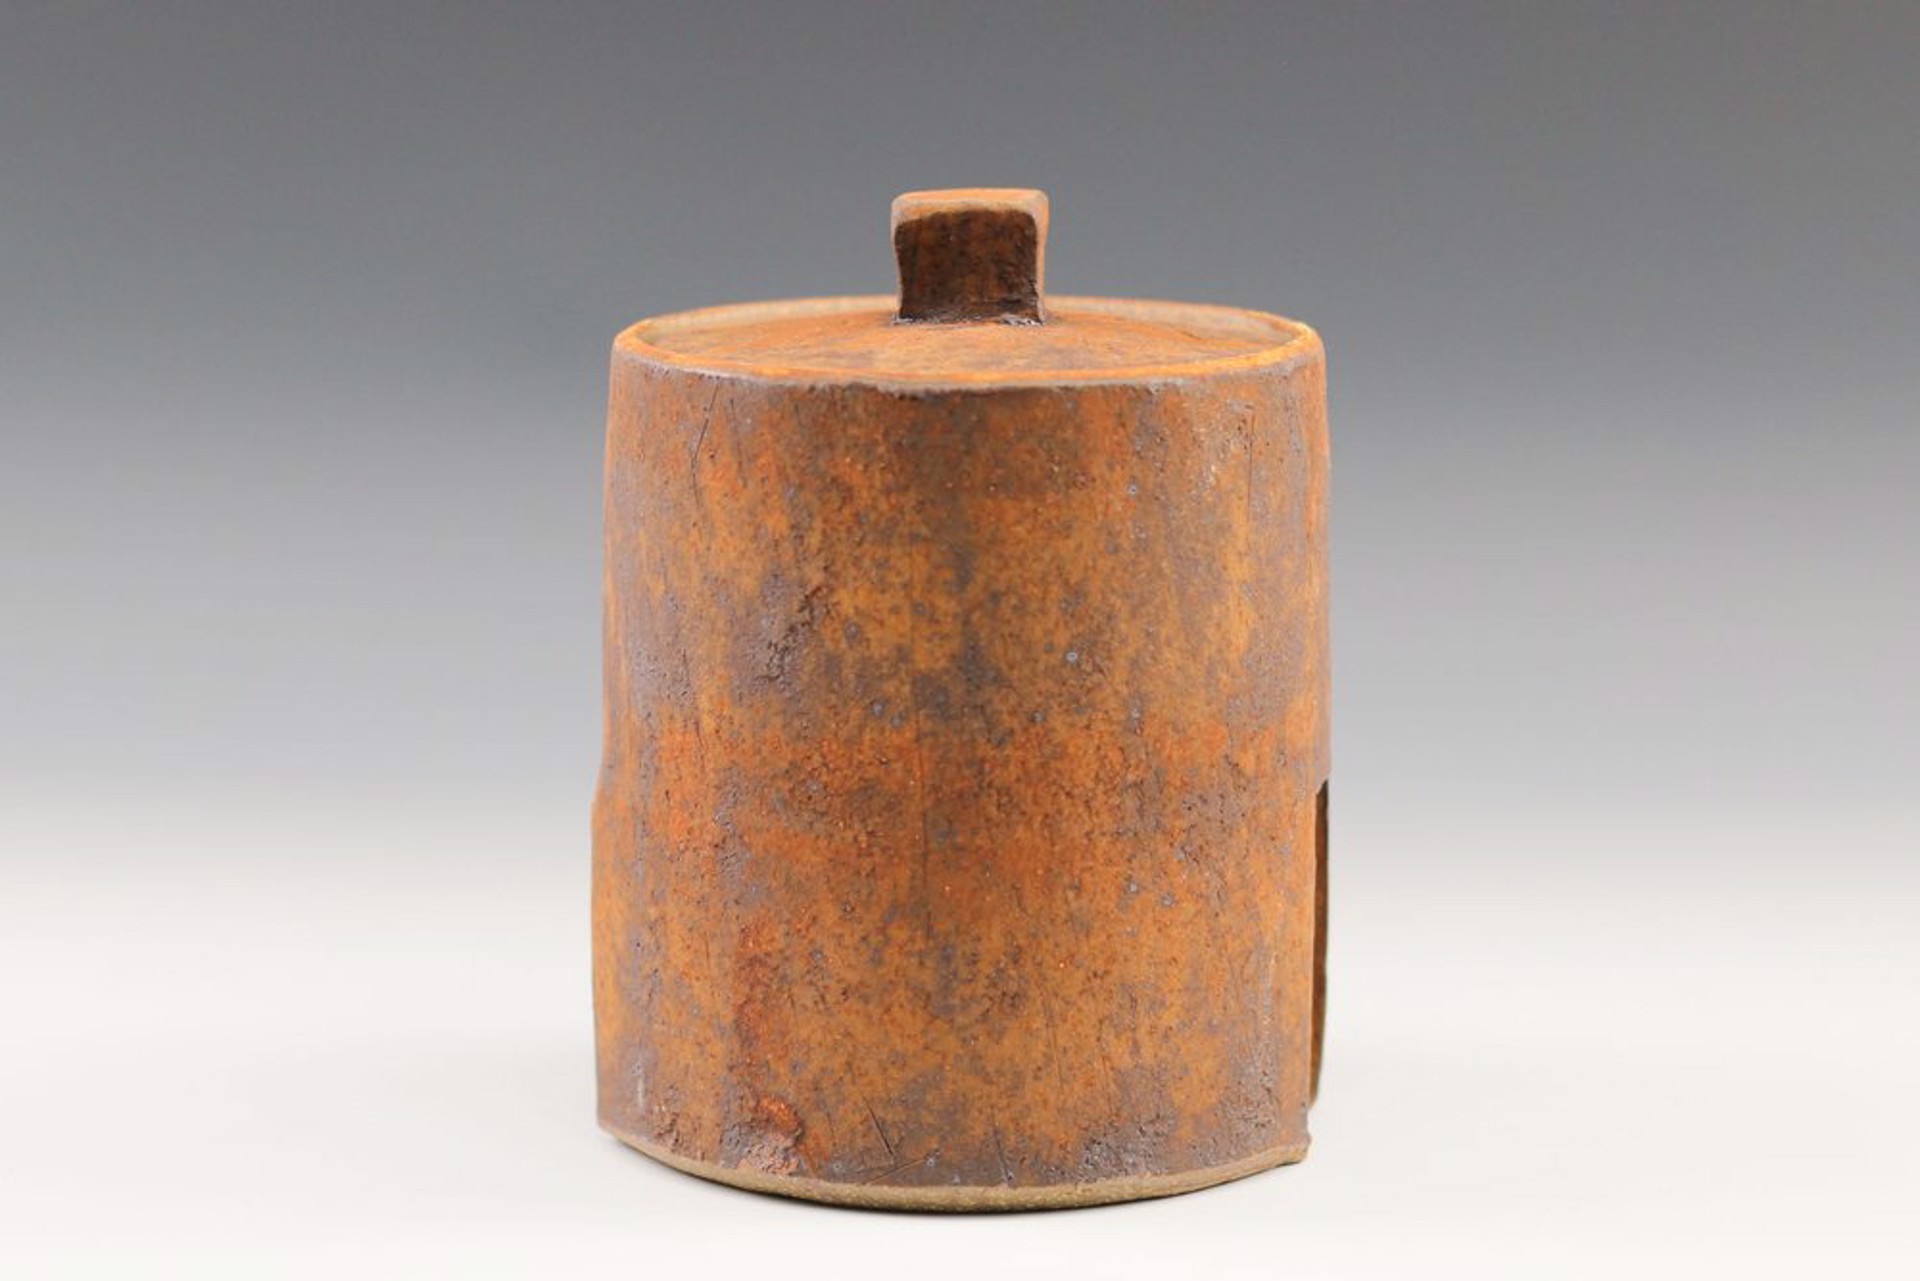 Covered Jar by Rick Hintze